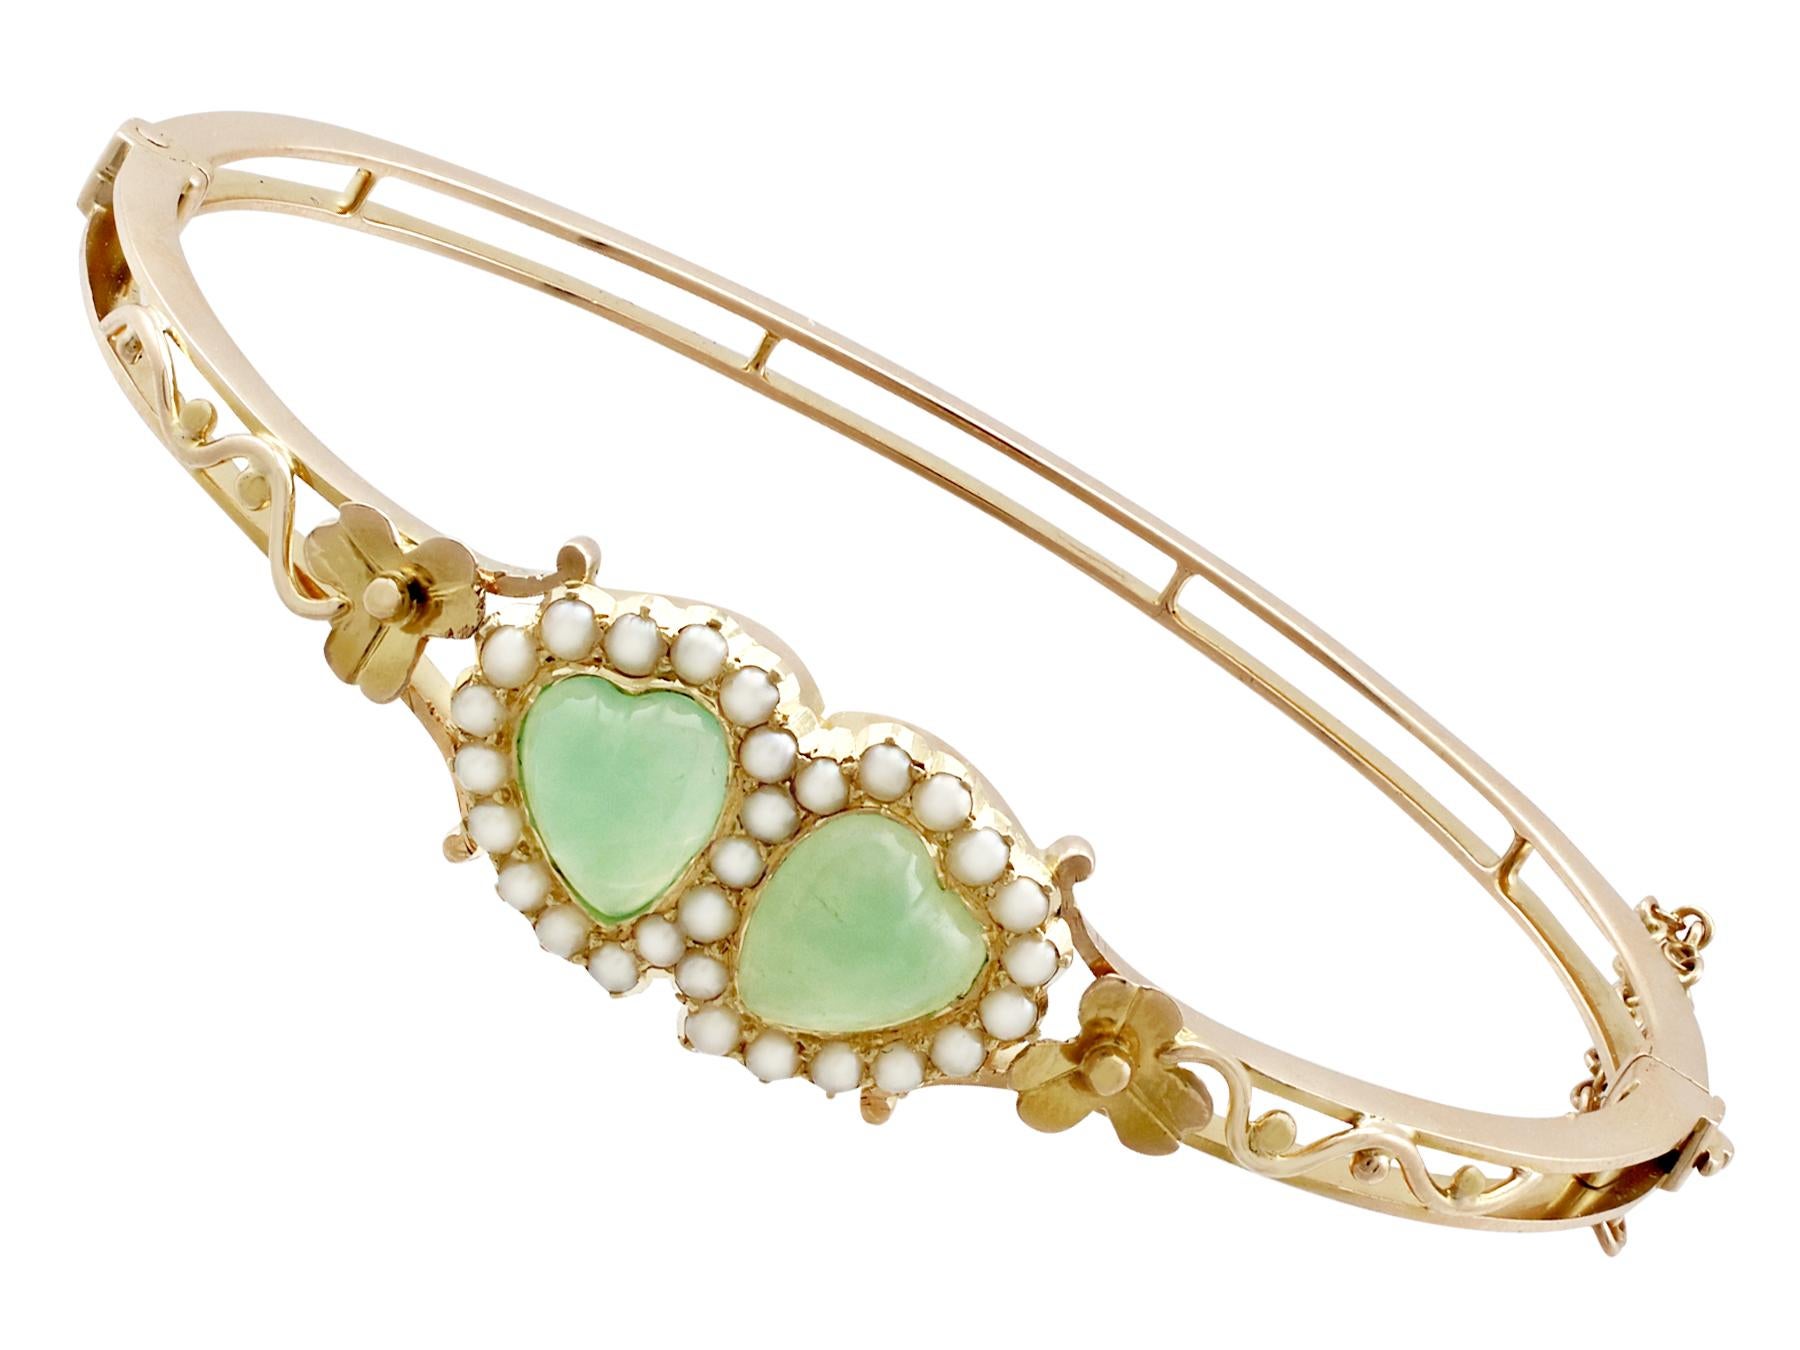 An impressive antique Victorian 2.20 carat chrysoprase and seed pearl, 15 karat yellow gold bangle; part of our diverse antique jewelry and estate jewelry collections.

This fine and impressive antique bangle has been crafted in 15k yellow